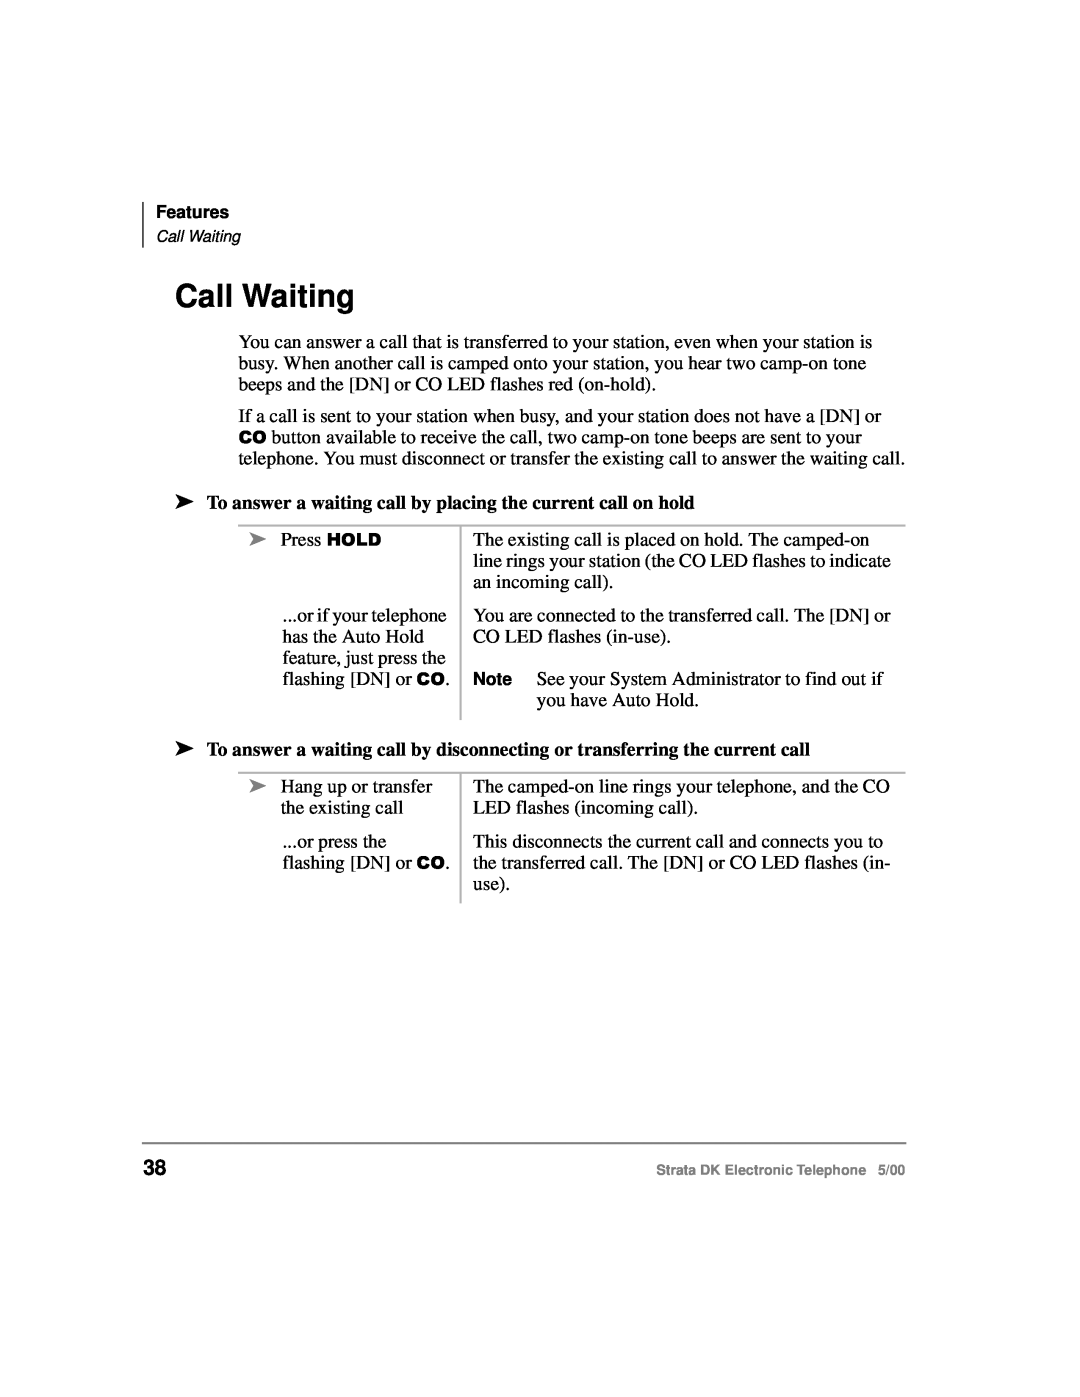 Toshiba Strata DK manual Call Waiting, To answer a waiting call by placing the current call on hold 